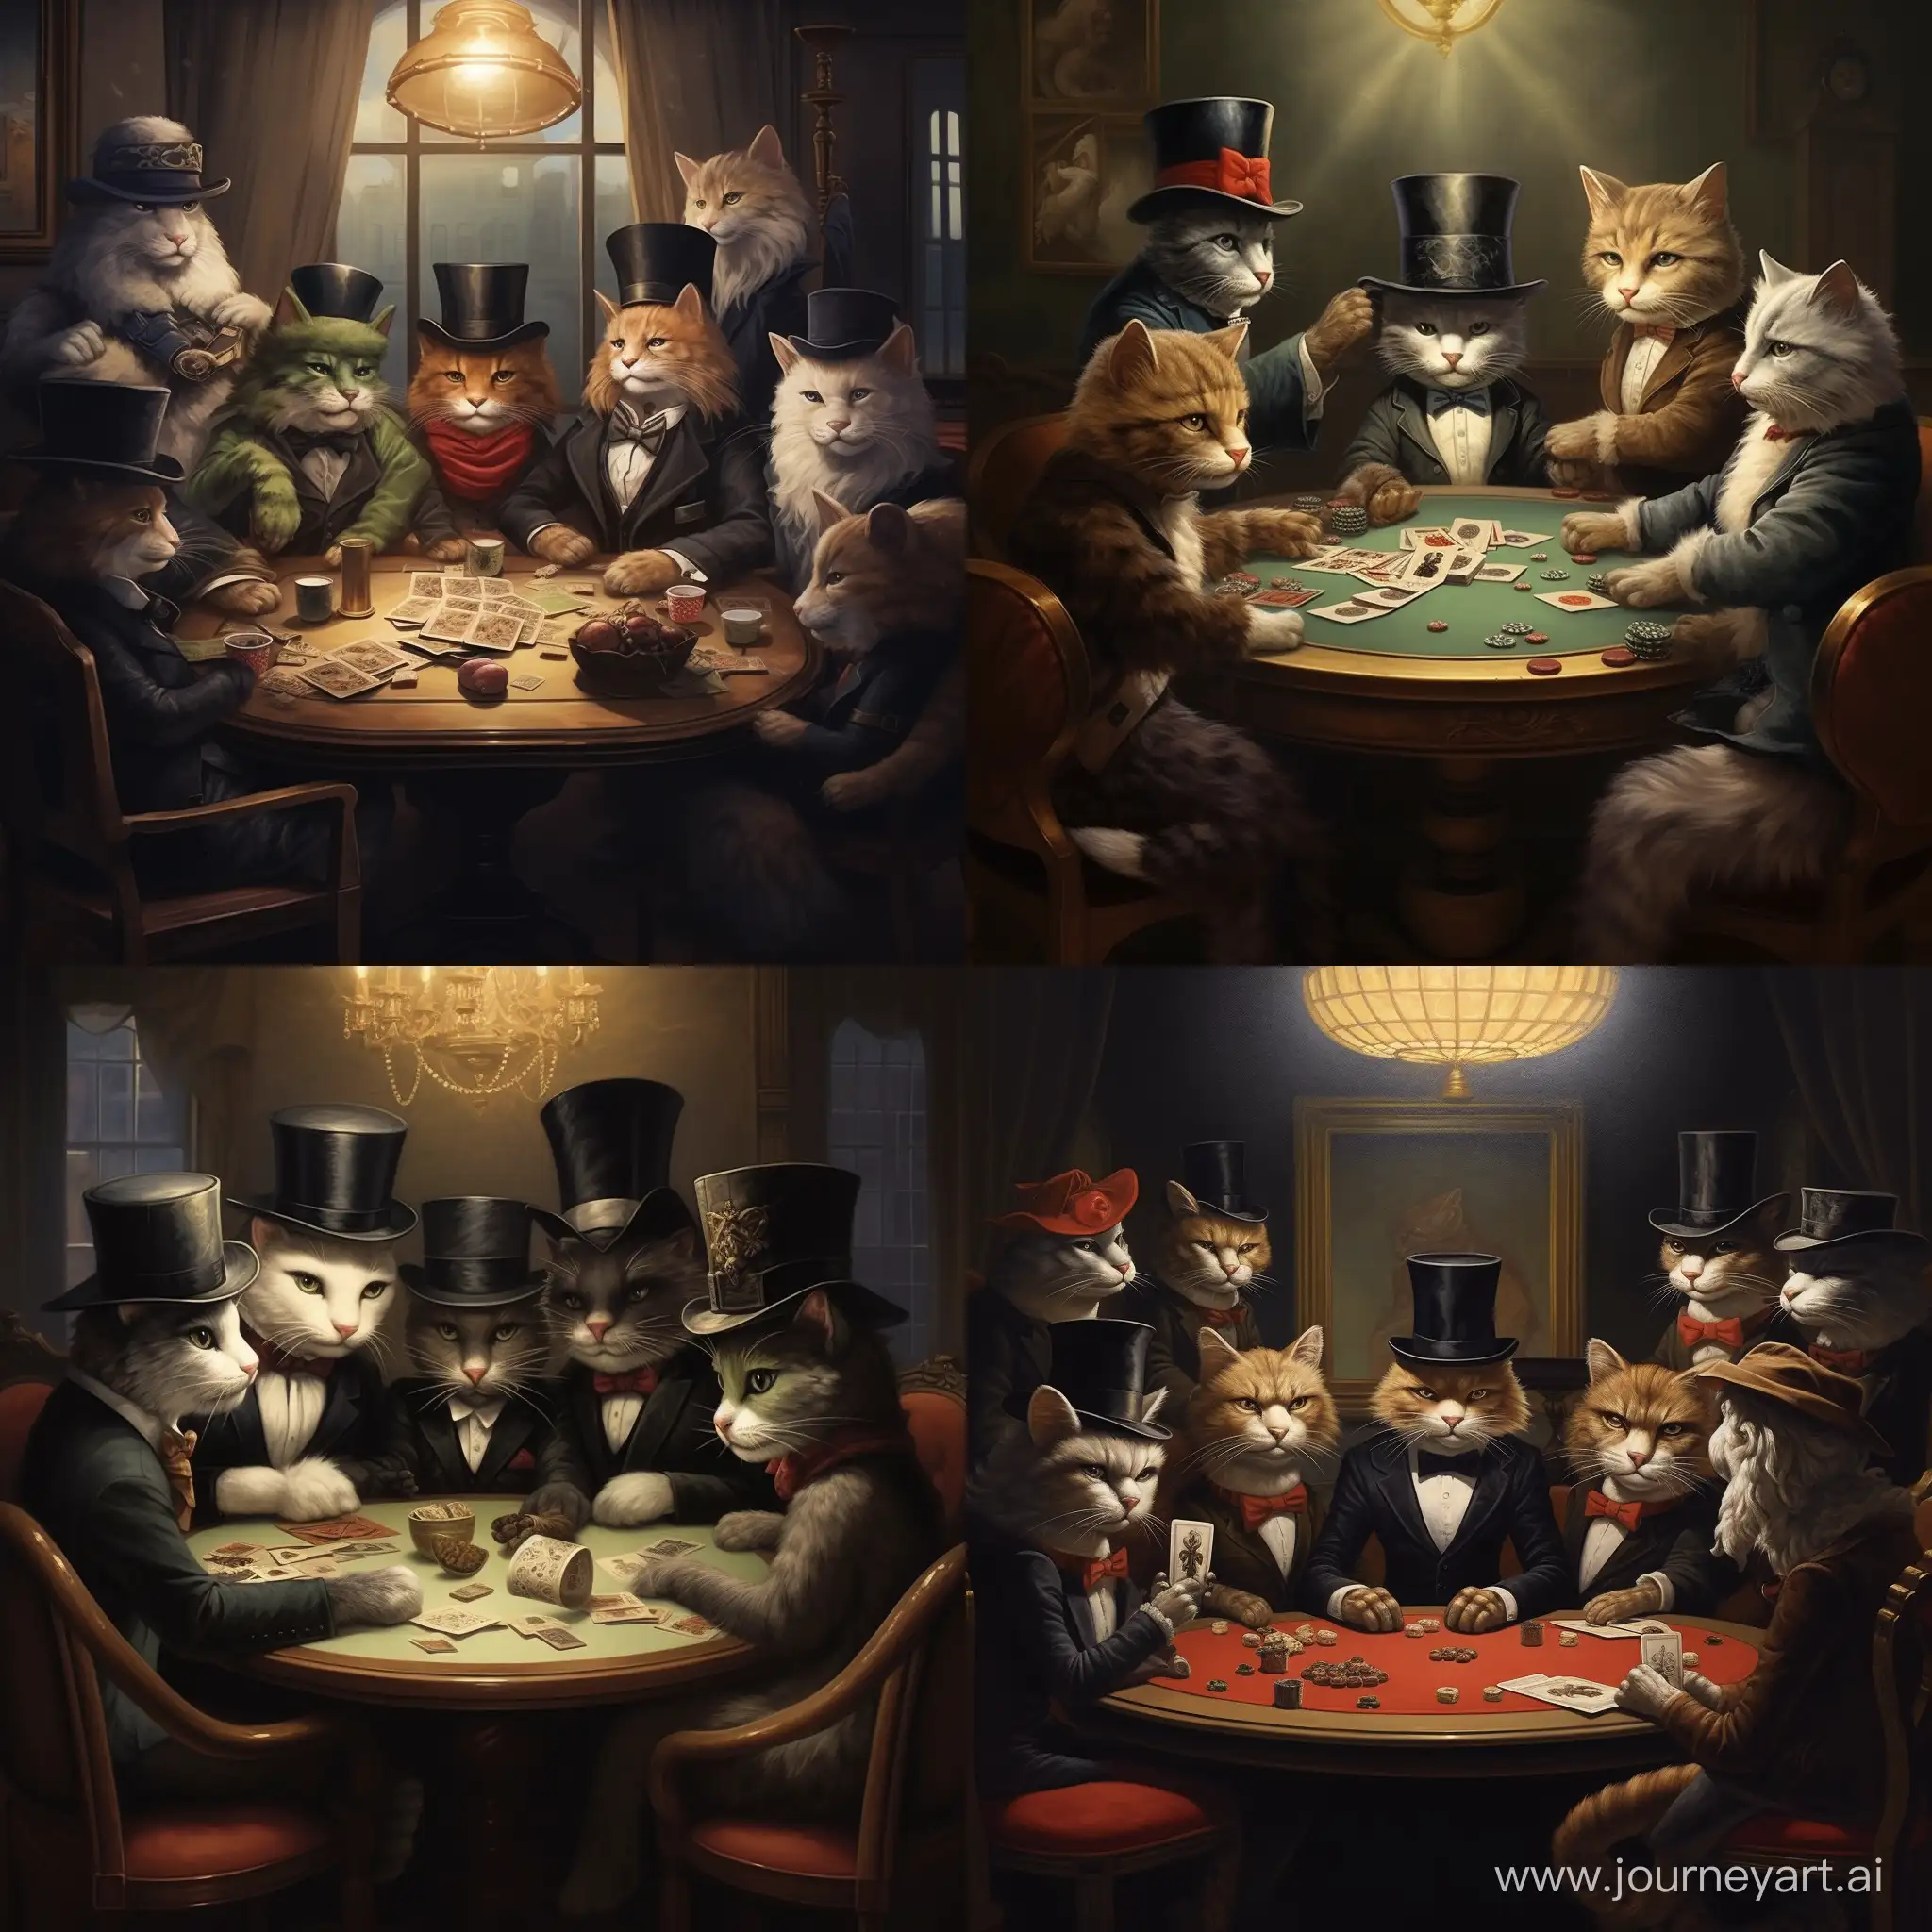 Cats-Wearing-Masks-and-Hats-Engaging-in-Table-Game-Fun